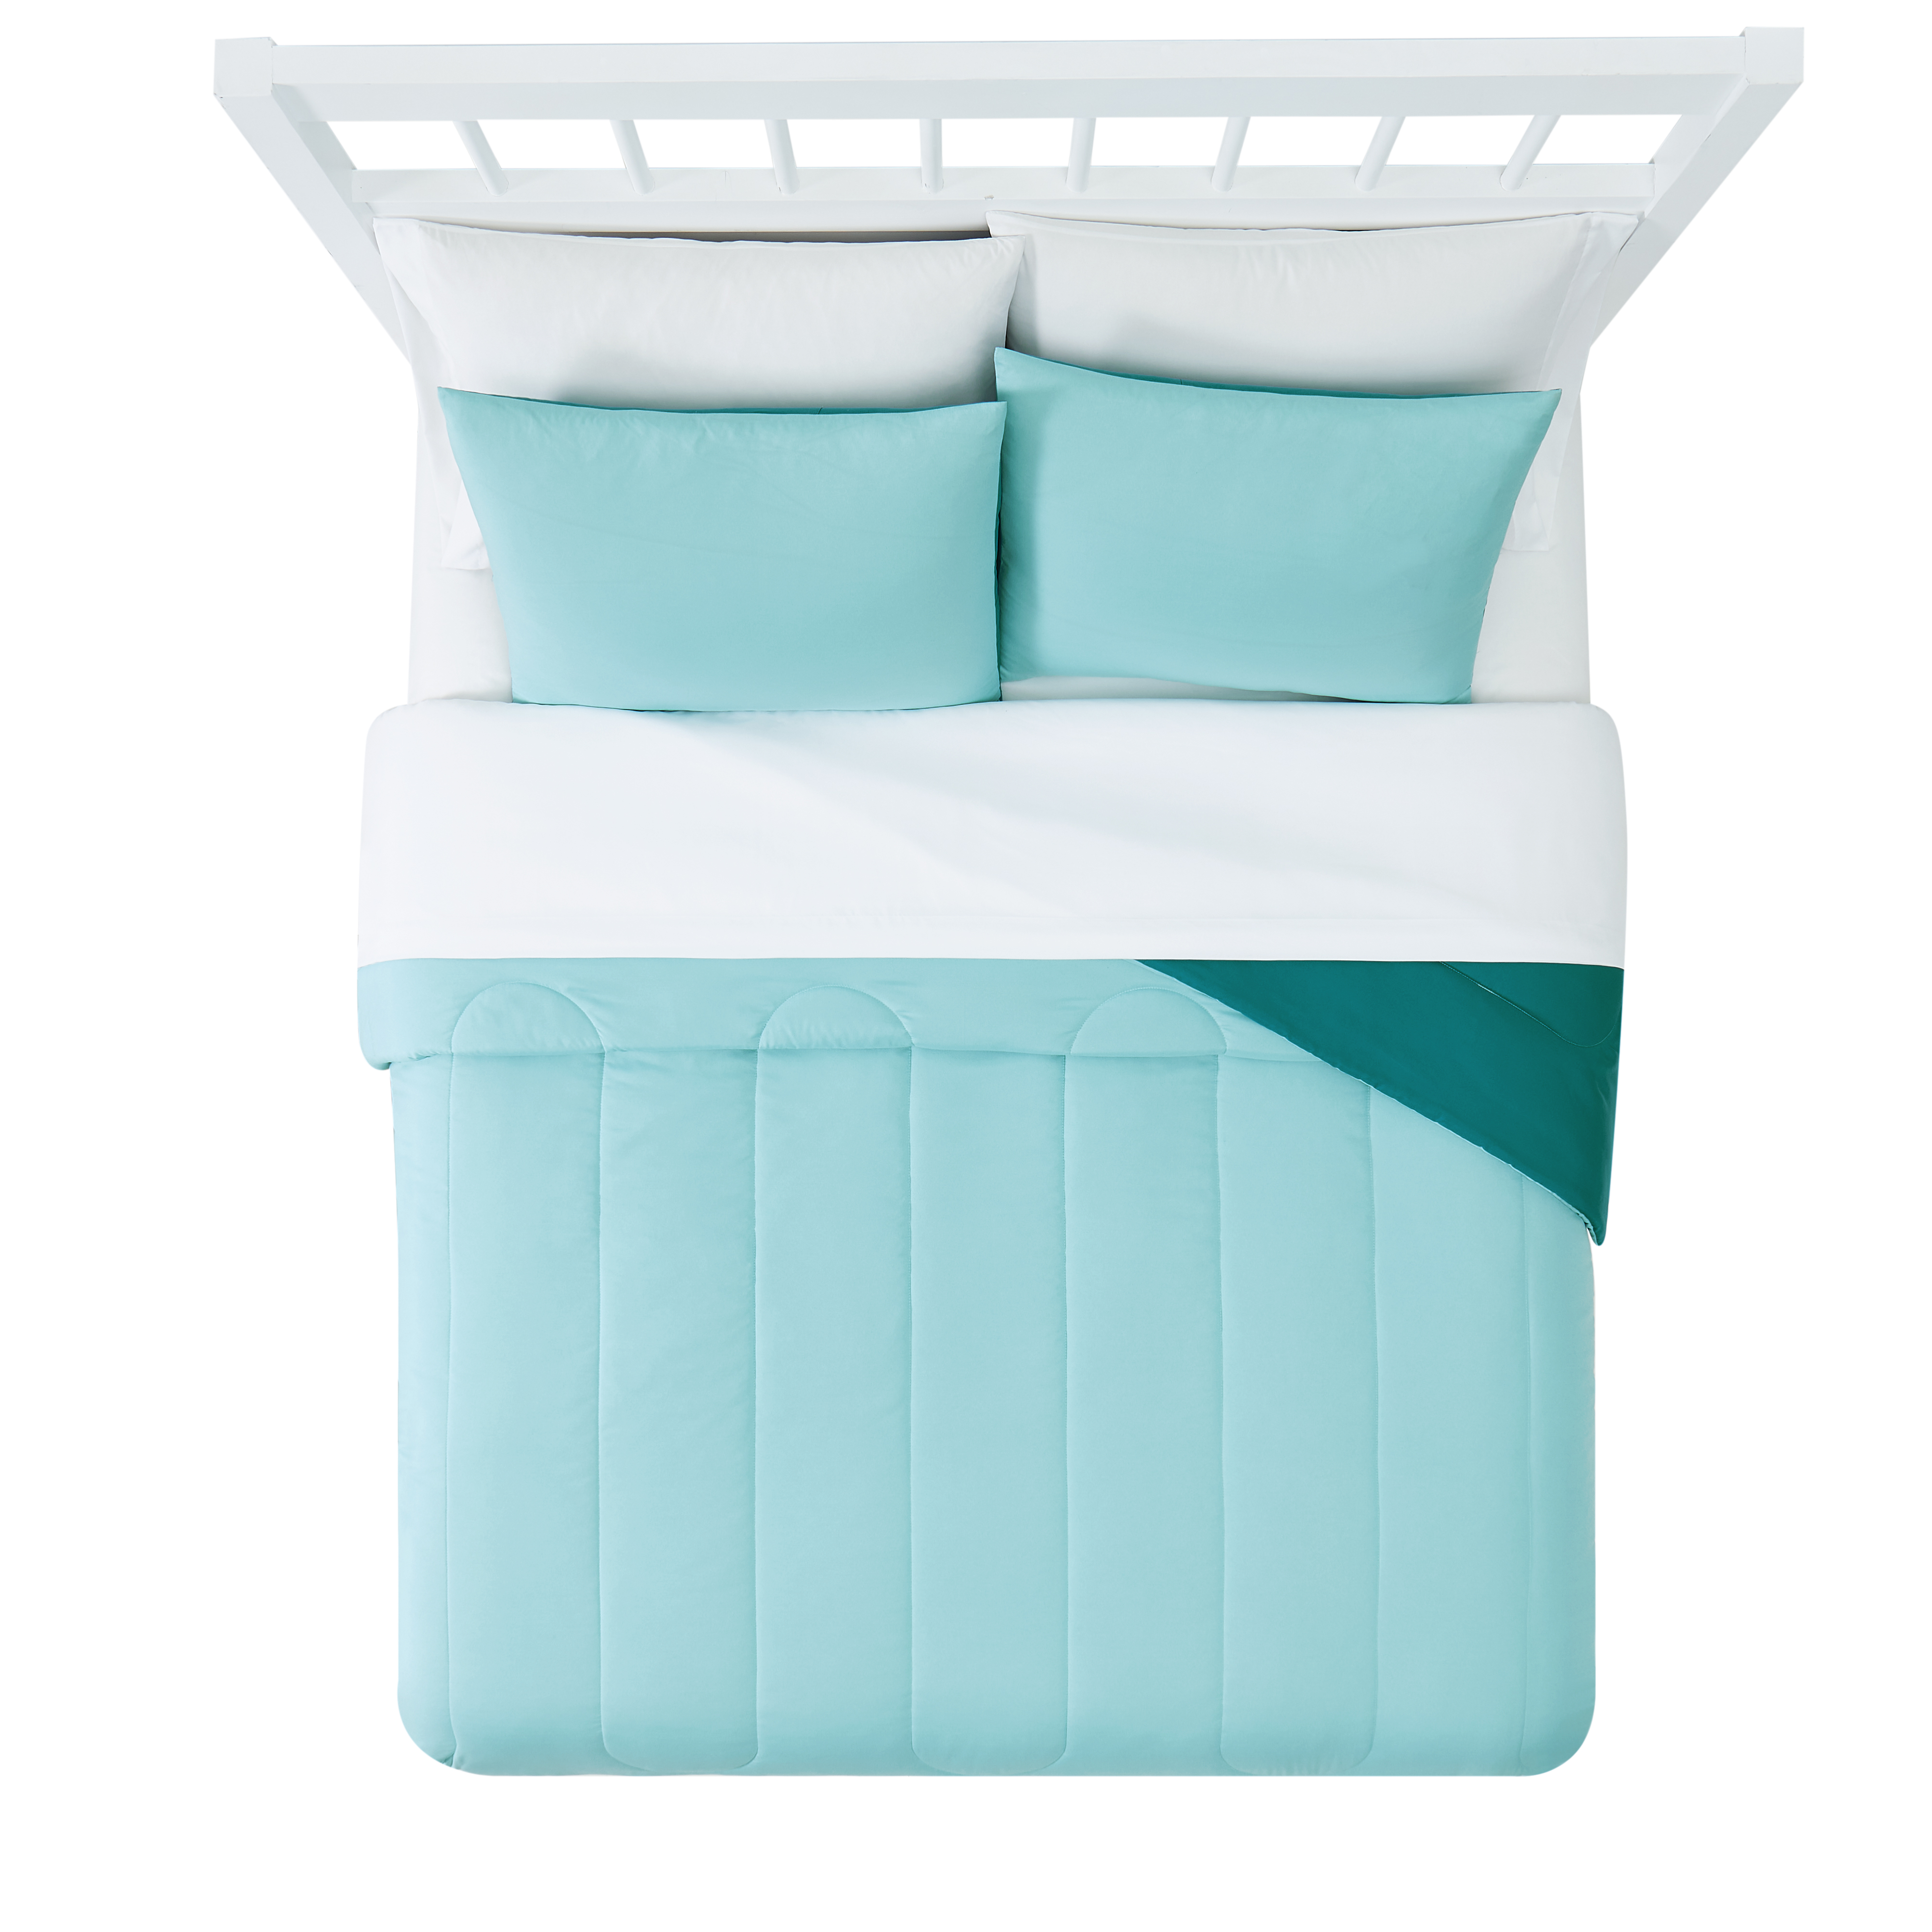 Mainstays Teal Reversible 7-Piece Bed in a Bag Comforter Set with Sheets, Queen - image 2 of 8